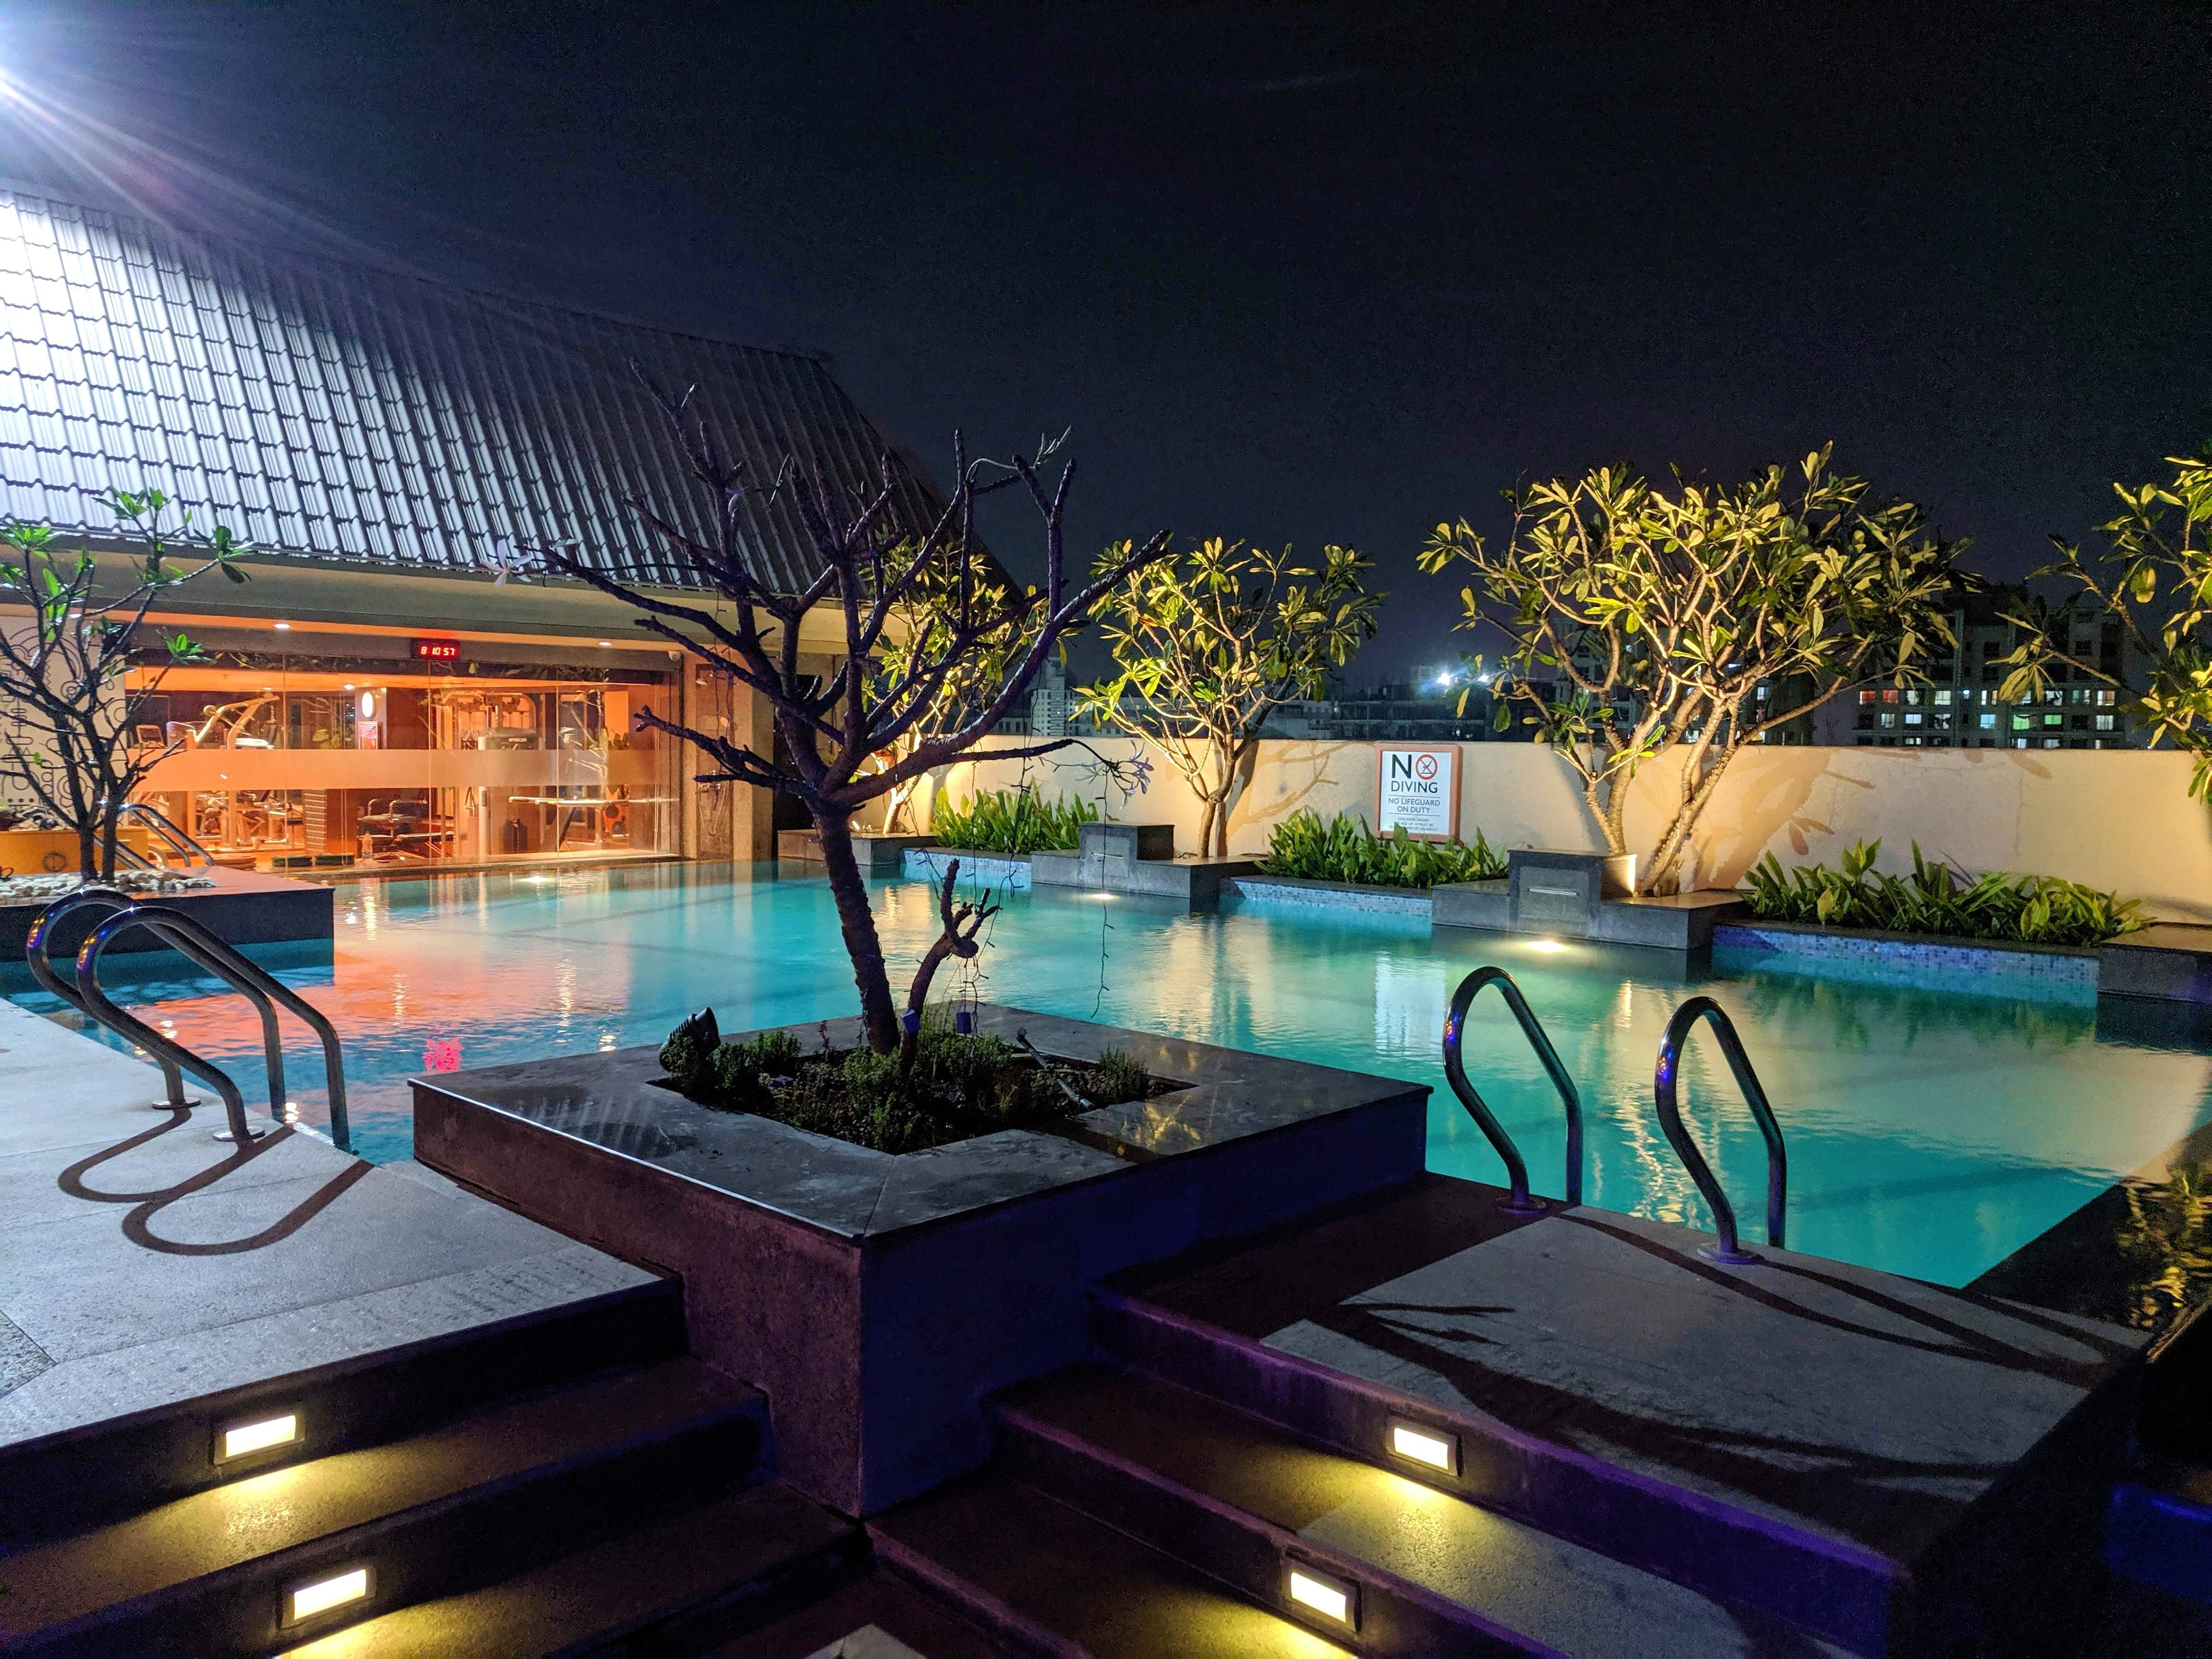 Swimming pool,Property,Lighting,Resort,Sky,Building,Home,Architecture,Leisure,House